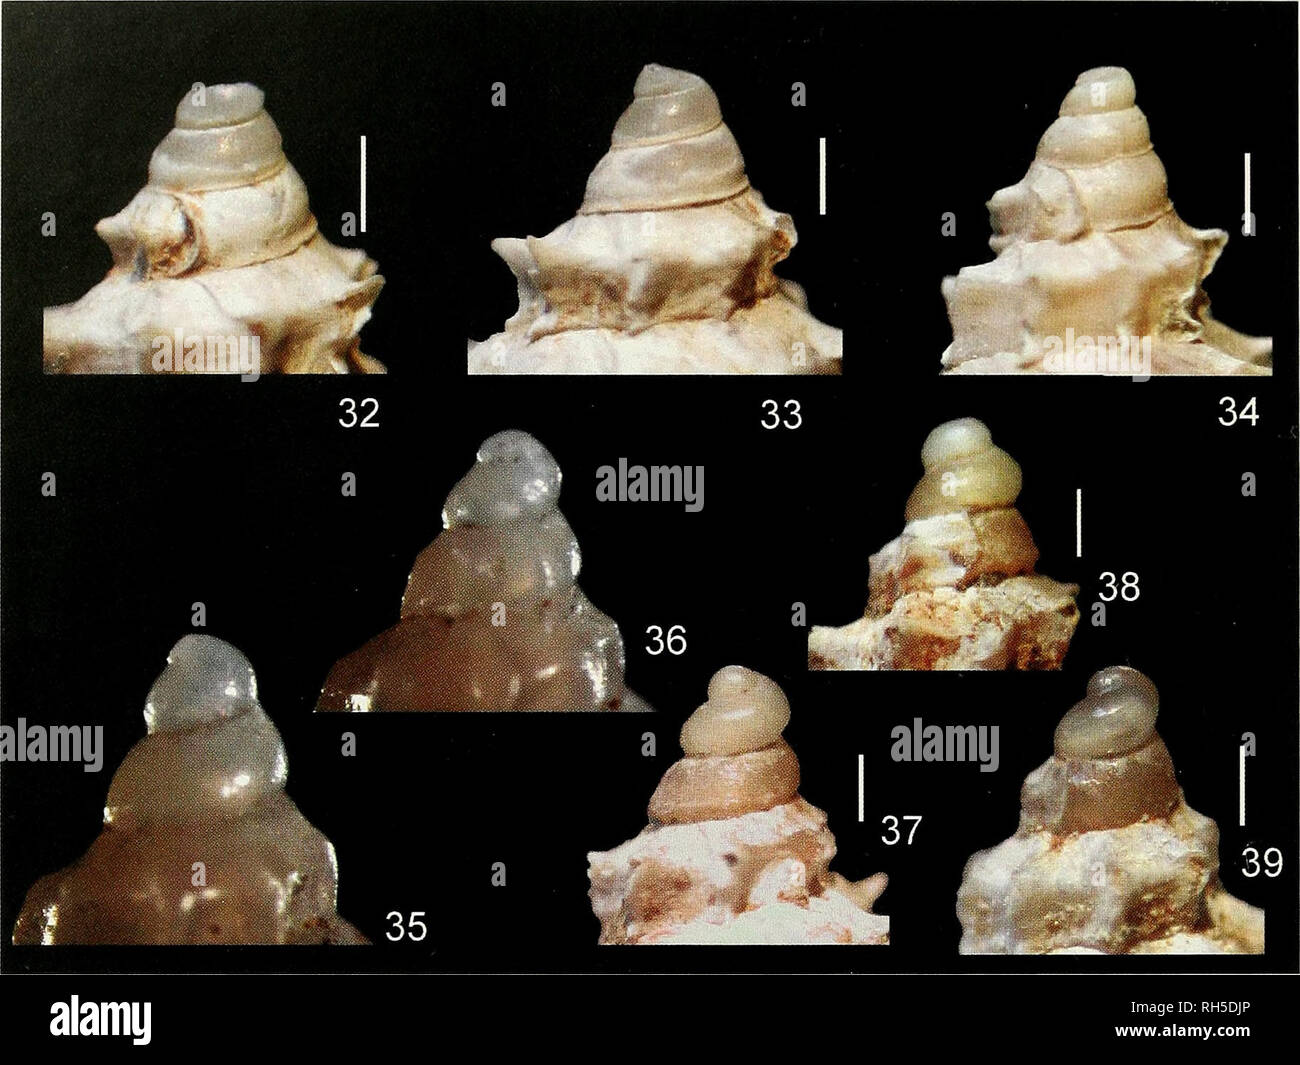 . Breviora. Zoology; Paleontology. 10 BREVIORA No. 521. Figures 32-39. Protoconchs and early teleoconch whorls; (32-34) Murex indicus new species, India, 40 miles W of Arrah, 17°54'N, 72°27'E, 46-55 m, MCZ 361889; Figures 32 and 33 figured by Ponder and Vokes (1988). (35-39) Murex carbonnieri (Jousseaume, 1881); (35) paralectotype MNHN, Aden, Red Sea (photo A. Robin); (36) lectotype MNHN, Aden, Red Sea (photo A. Robin); (37, 38) Singapore (Figs. 29-30); (39) Sri Lanka, coll. RH. Scale bars, 0.5 mm. Description. Shell medium-sized for the genus, up to 92.3 mm in height at maturity (coll. RH, &q Stock Photo